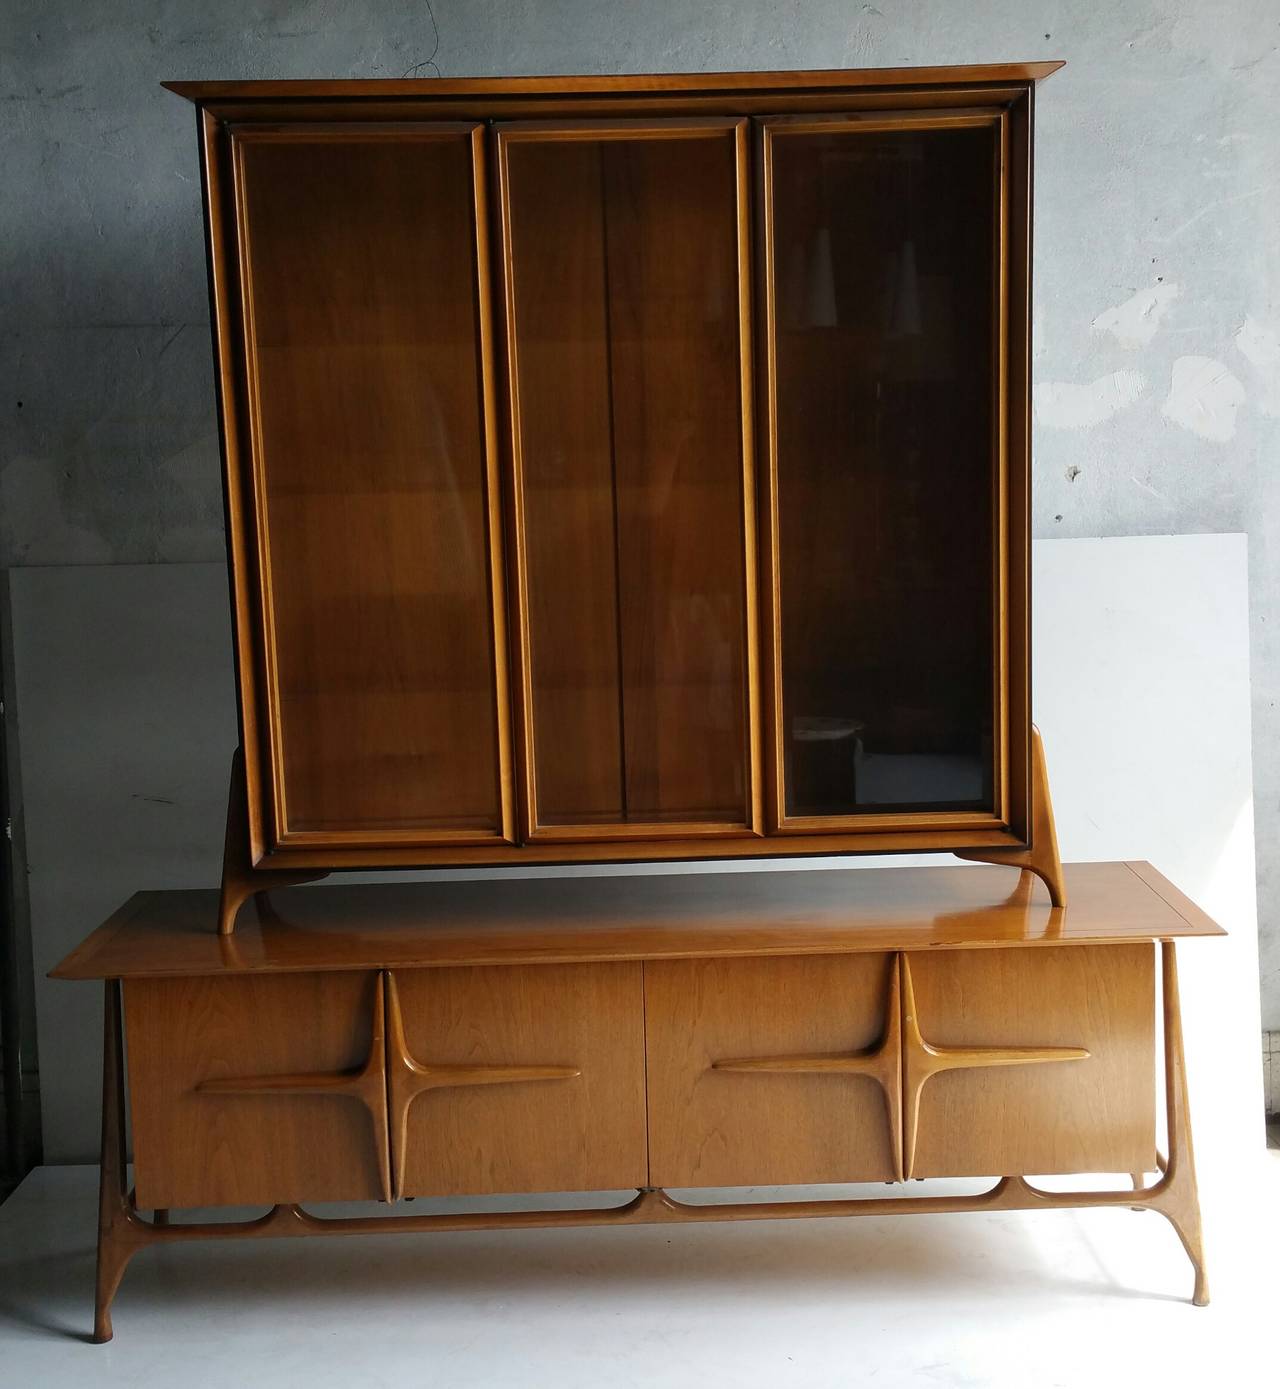 20th Century Modernist Sculptural Sideboard with Top Cabinet For Sale